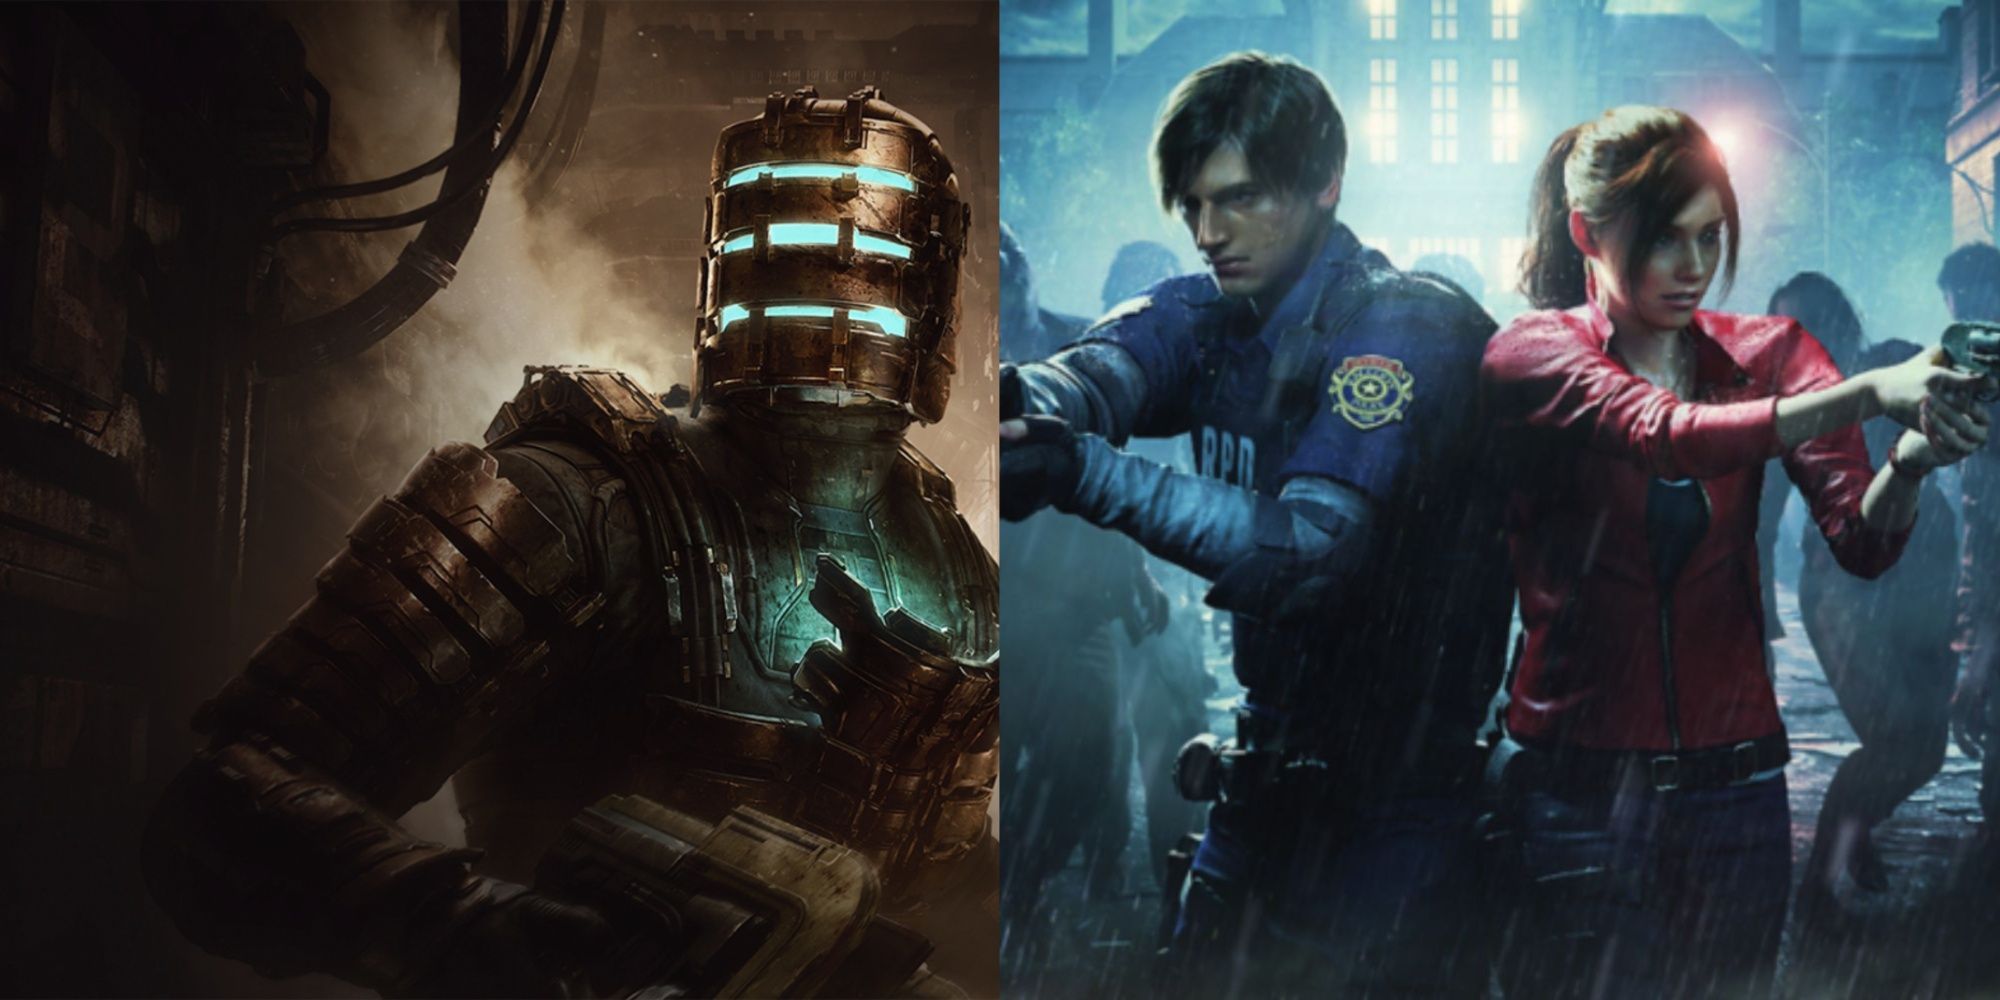 Isaac from the Dead Space remake and Leon and Claire from the Resident Evil 2 remake.